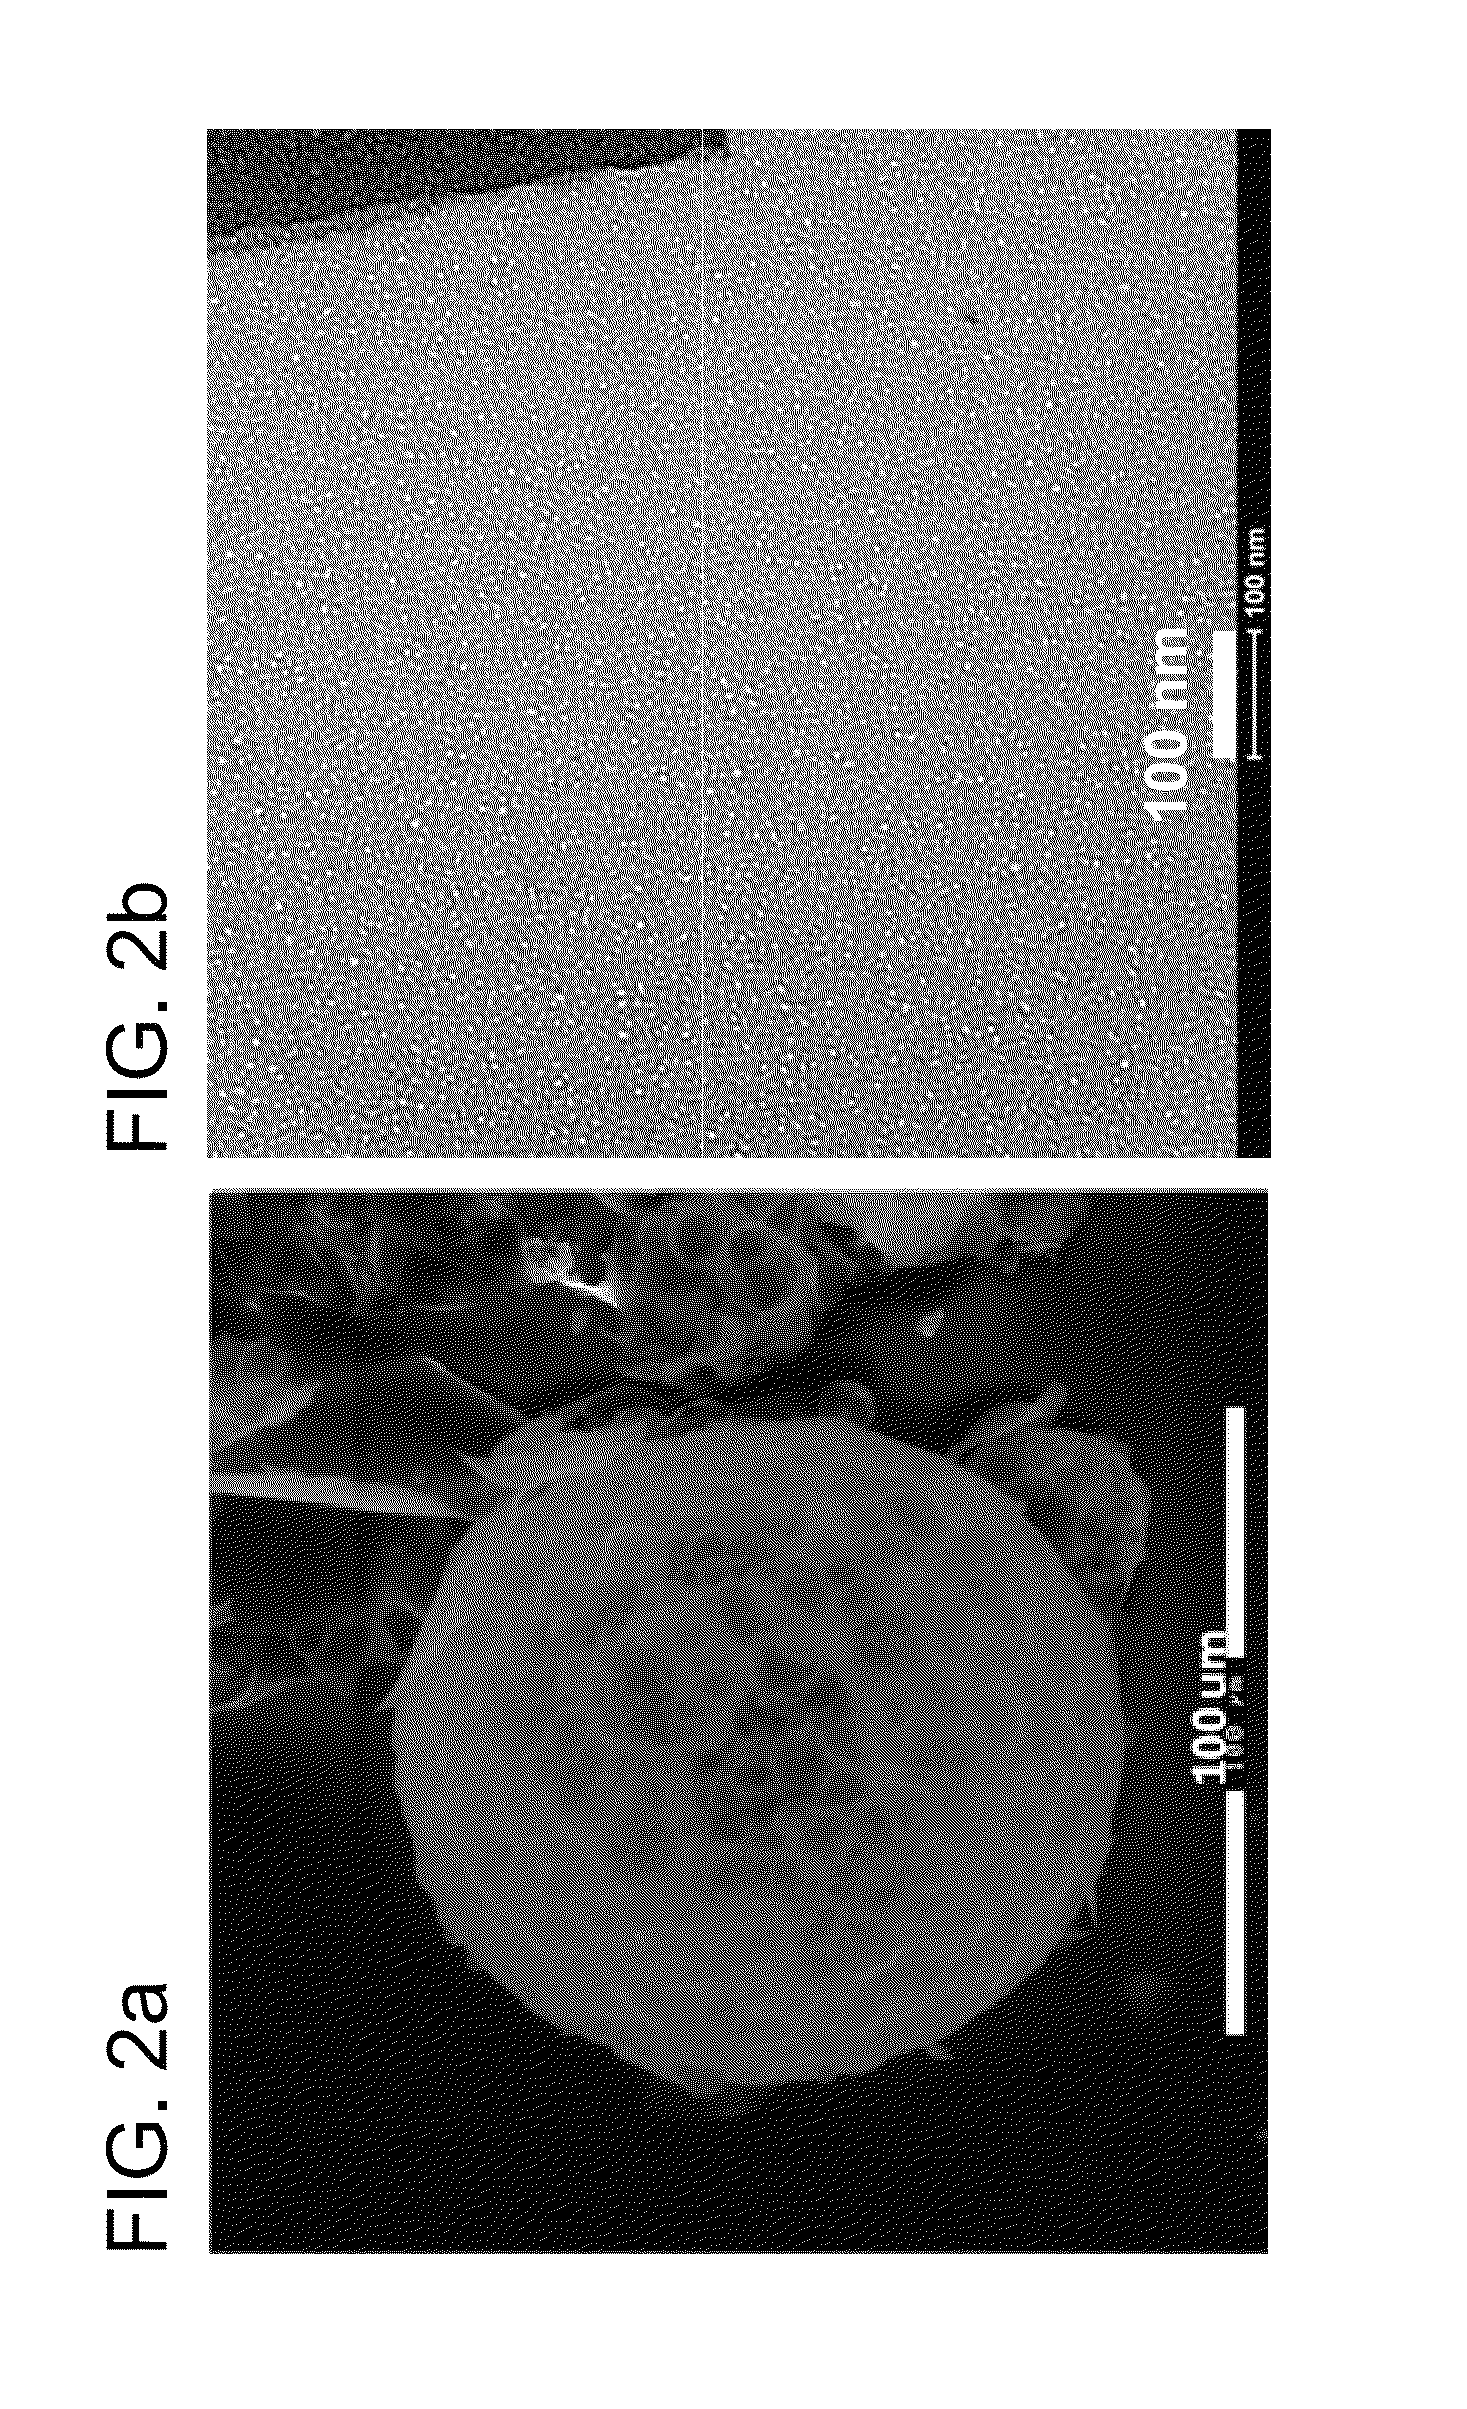 Method for making amorphous particles using a uniform melt-state in a microwave generated plasma torch